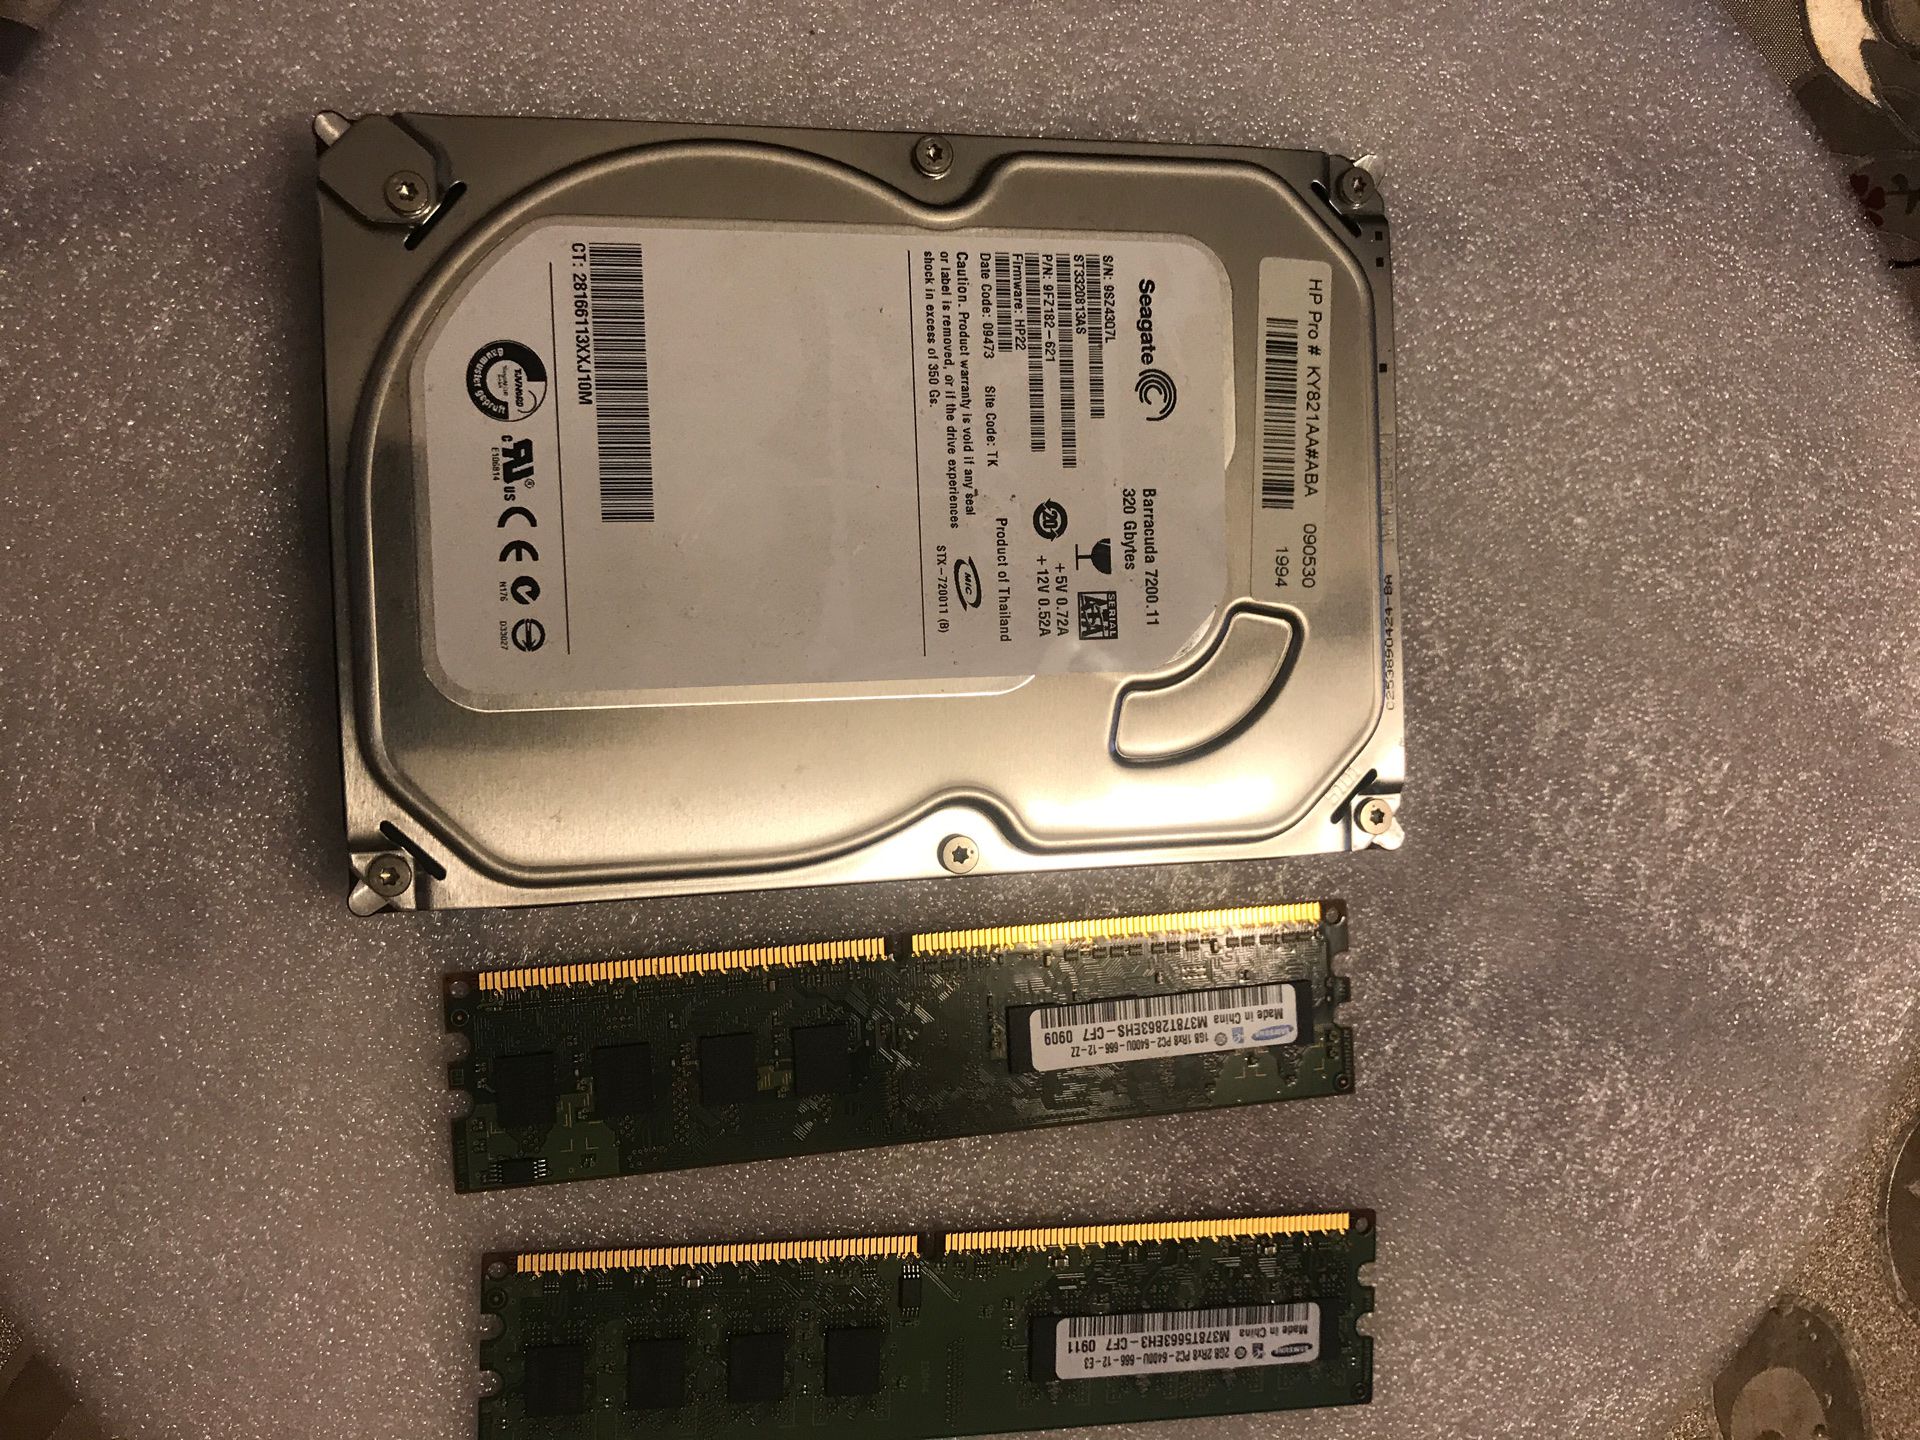 Seagate HDD 320 Gbytes and 2 Gb memory